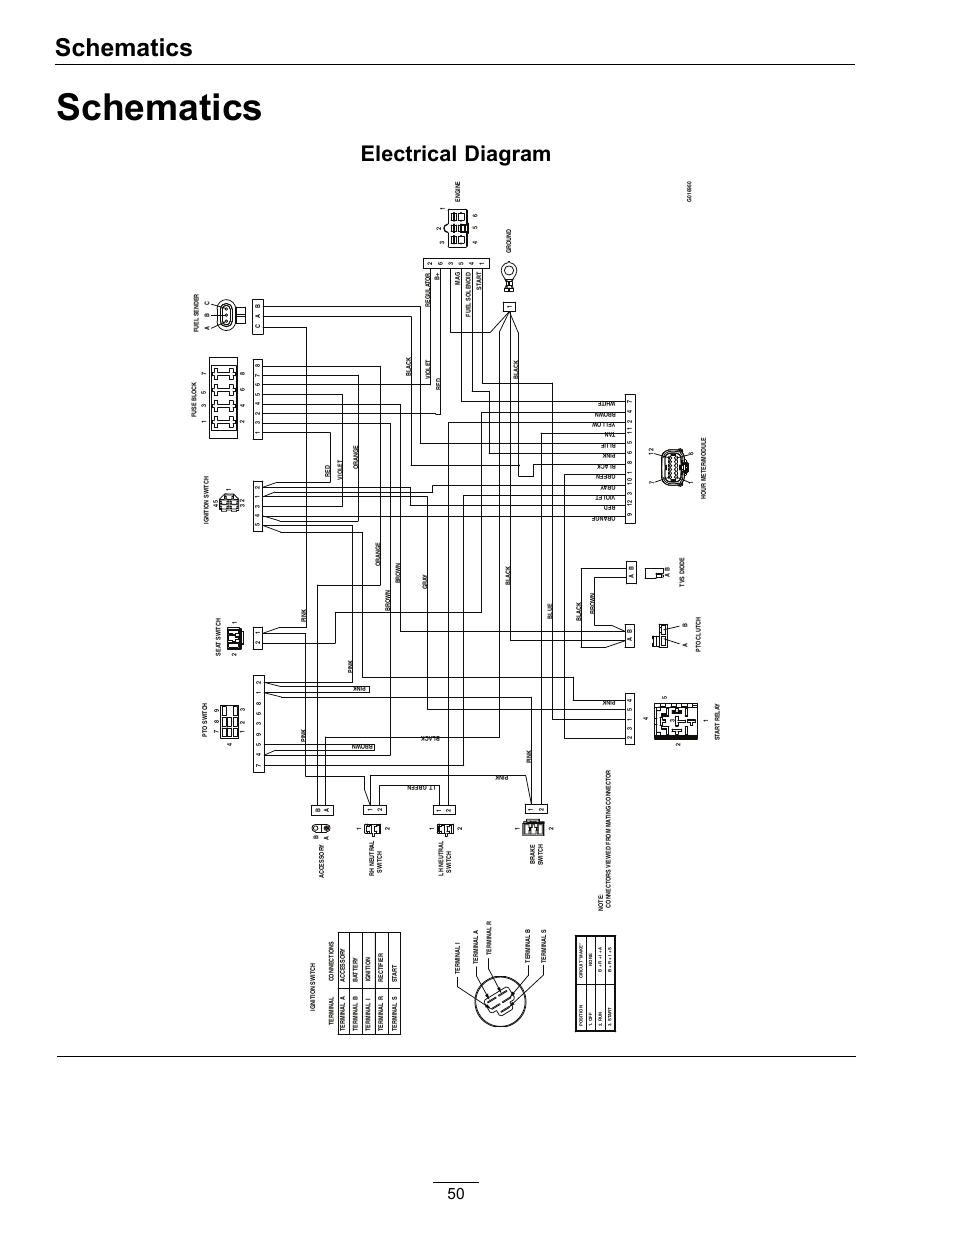 voy electric scooter wiring diagram